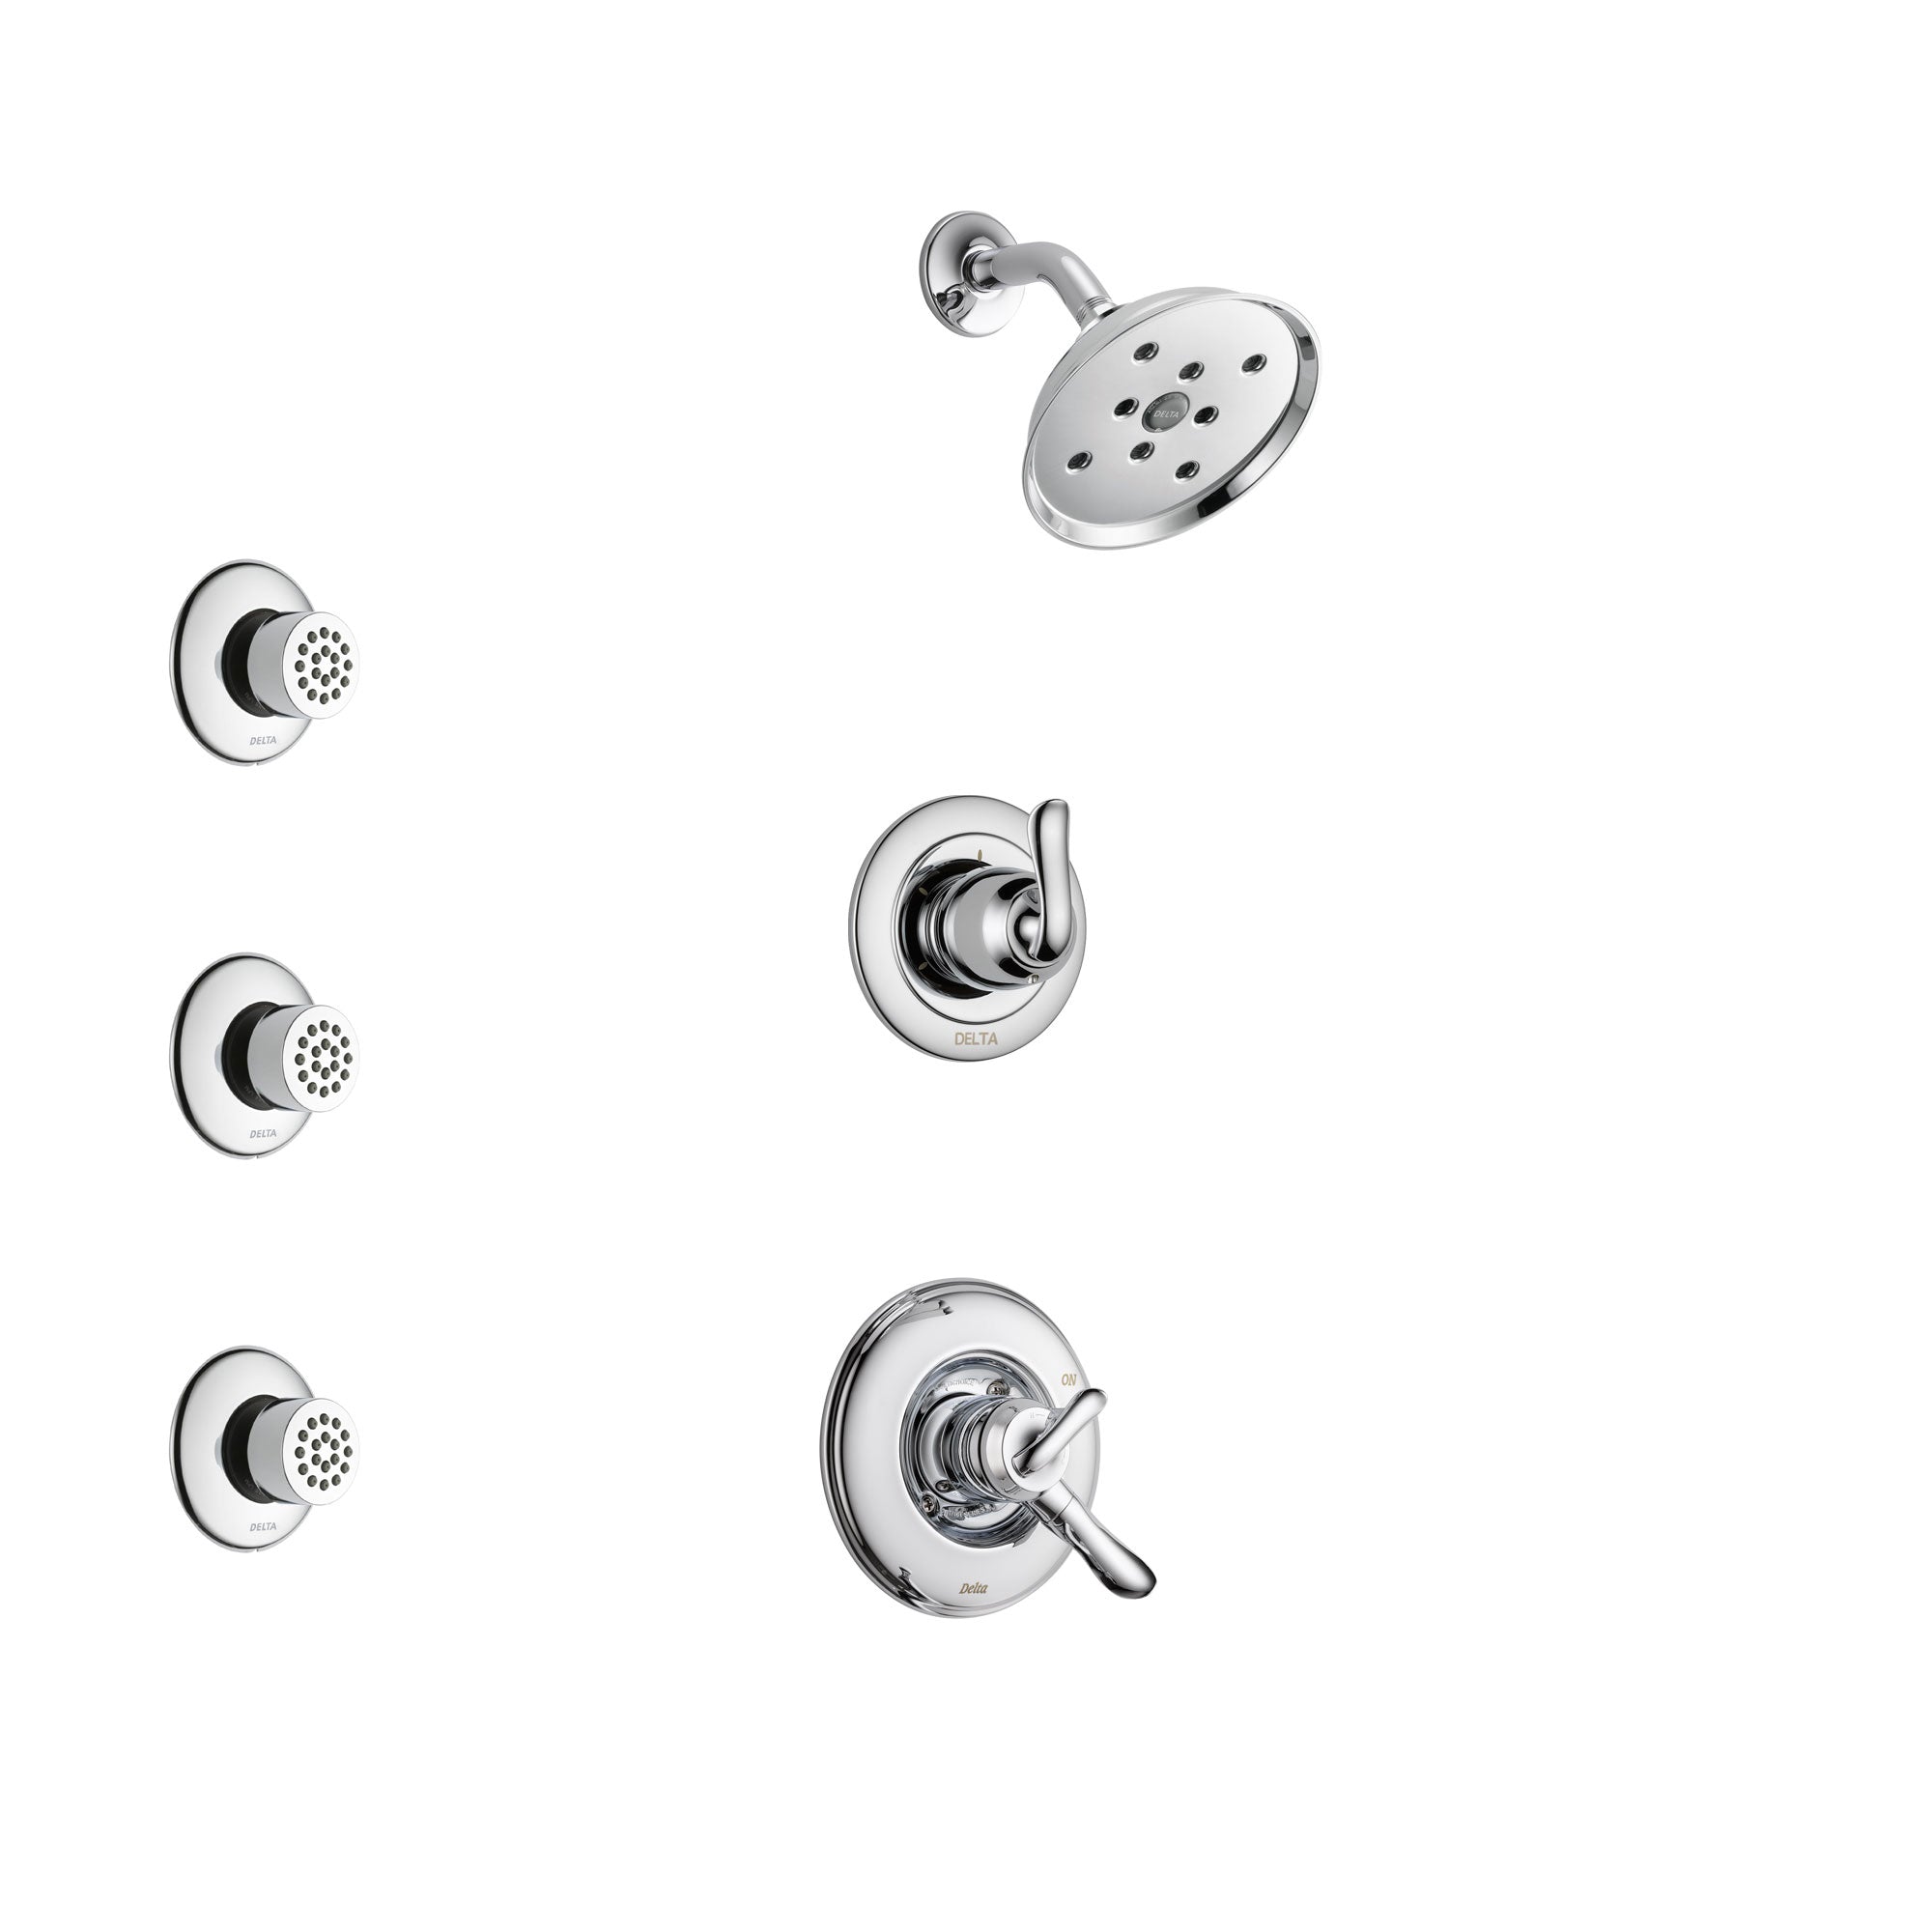 Delta Linden Chrome Finish Shower System with Dual Control Handle, 3-Setting Diverter, Showerhead, and 3 Body Sprays SS172941